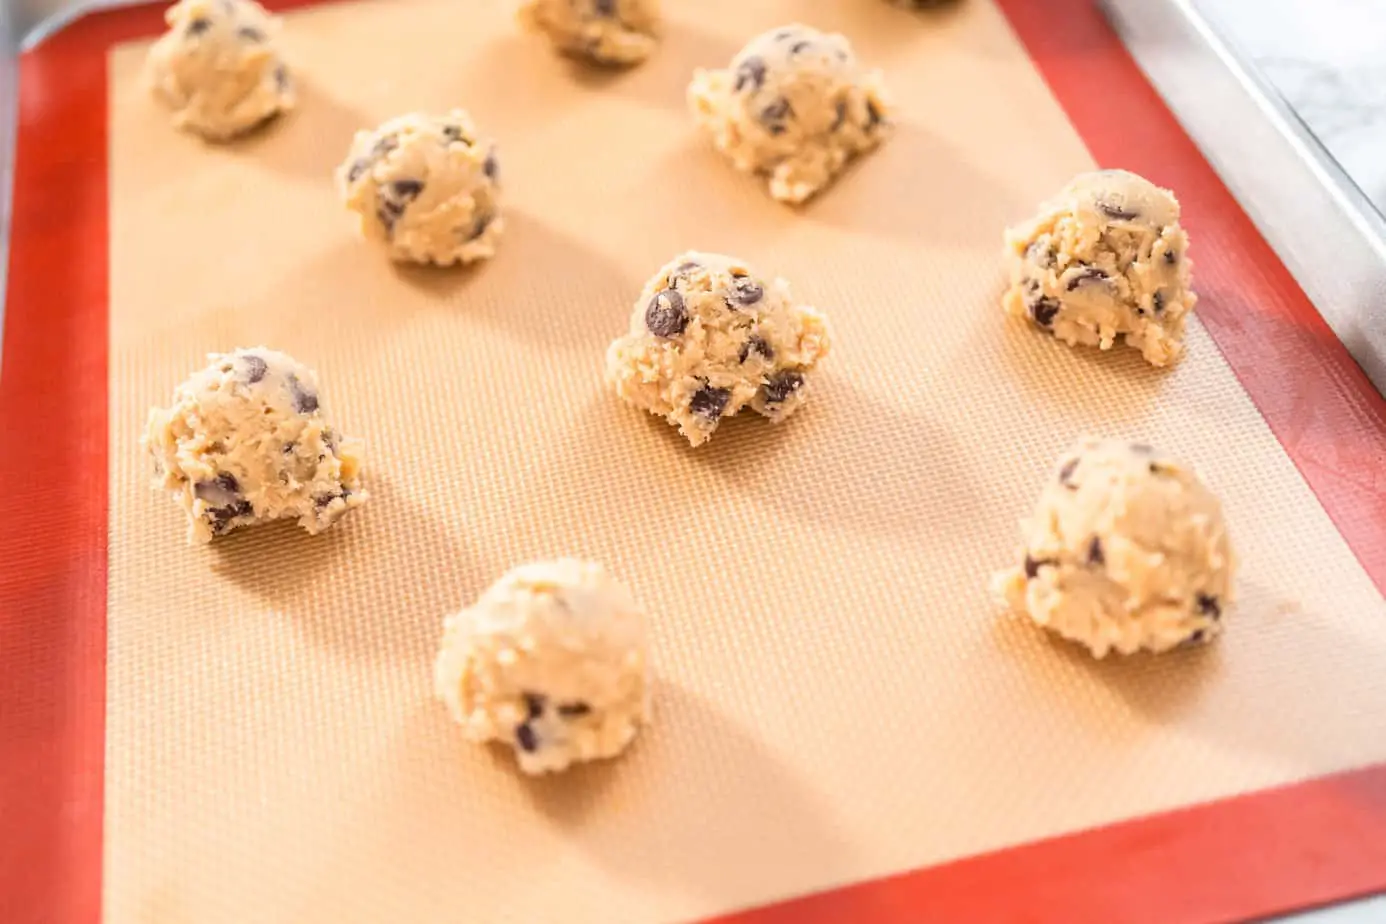 Tips & Tricks for the Best Budget-Friendly Chocolate Chip Cookies